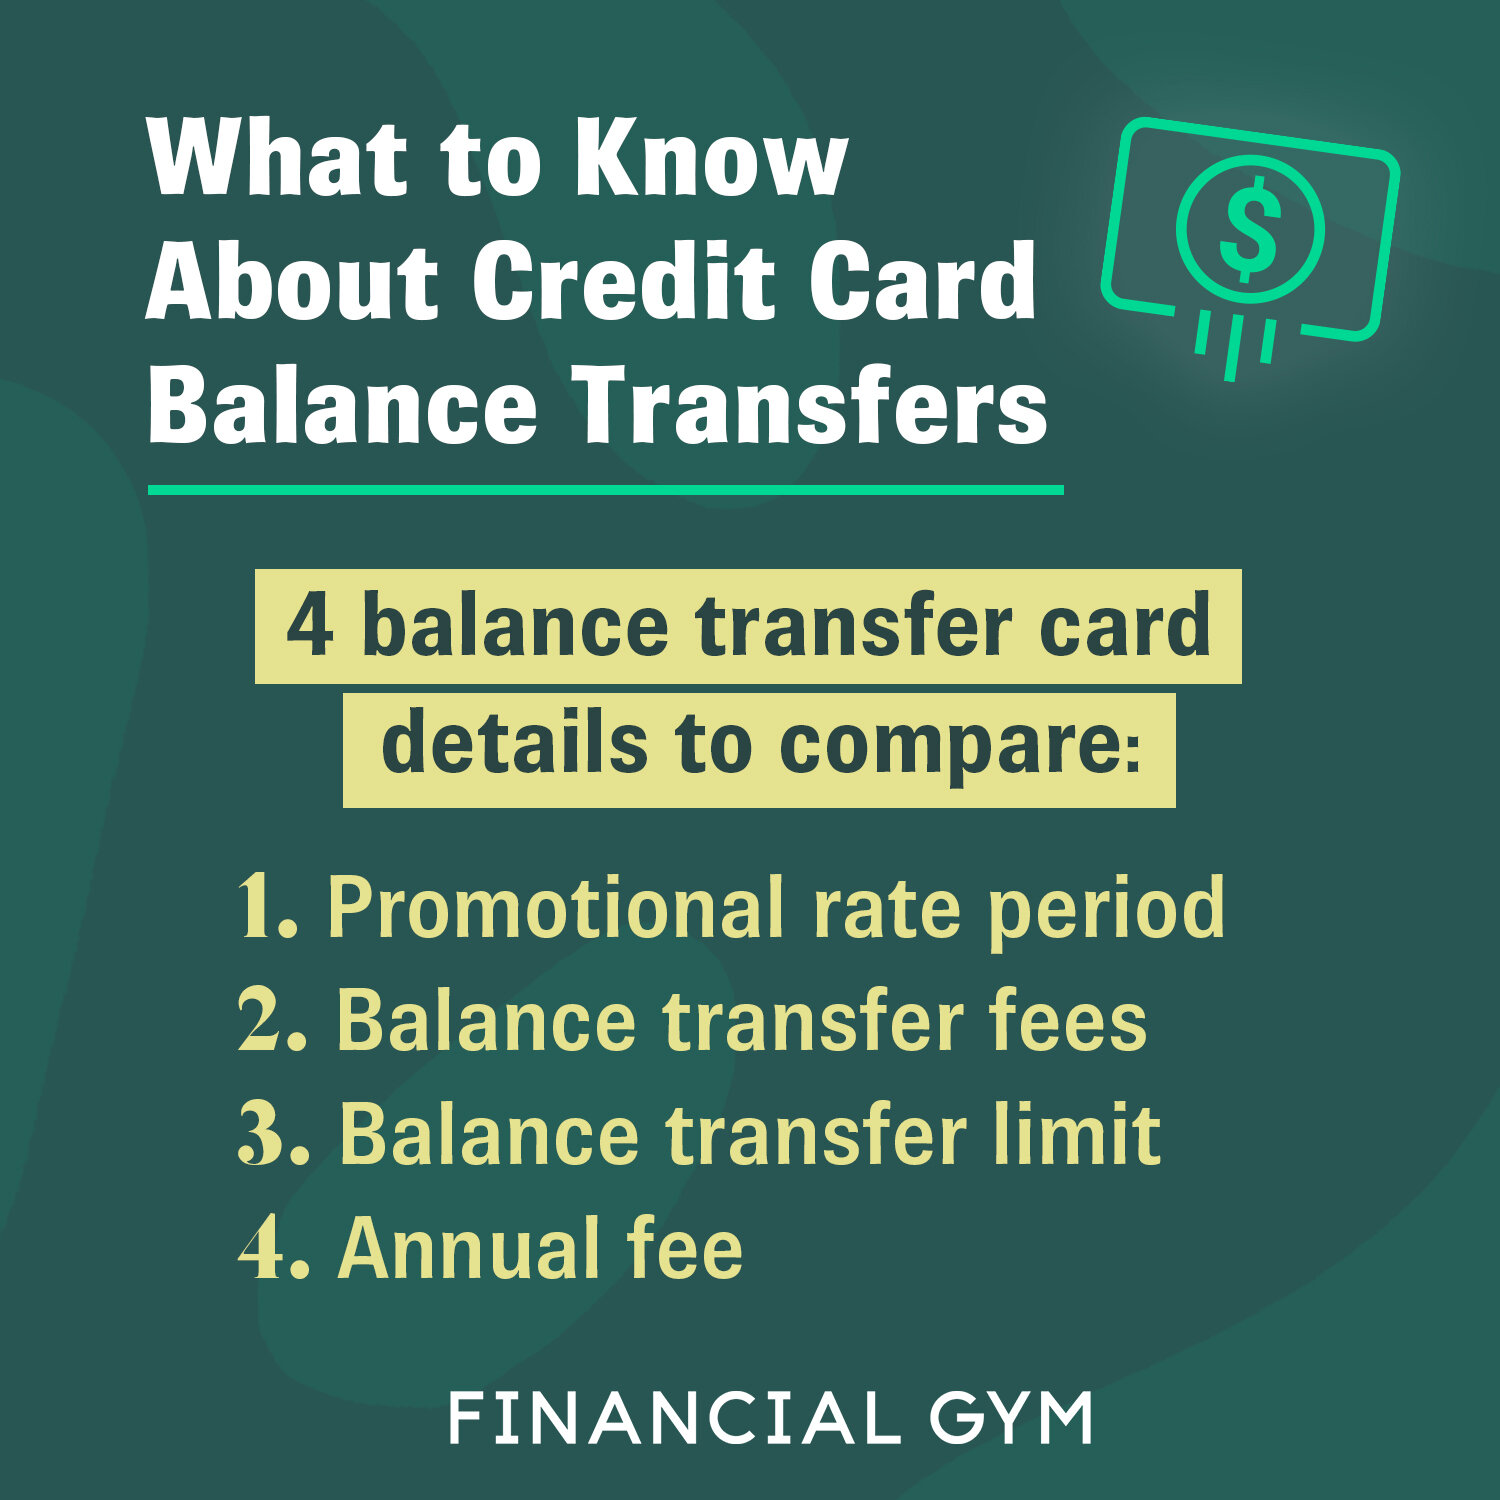 What to Know About Credit Card Balance Transfers